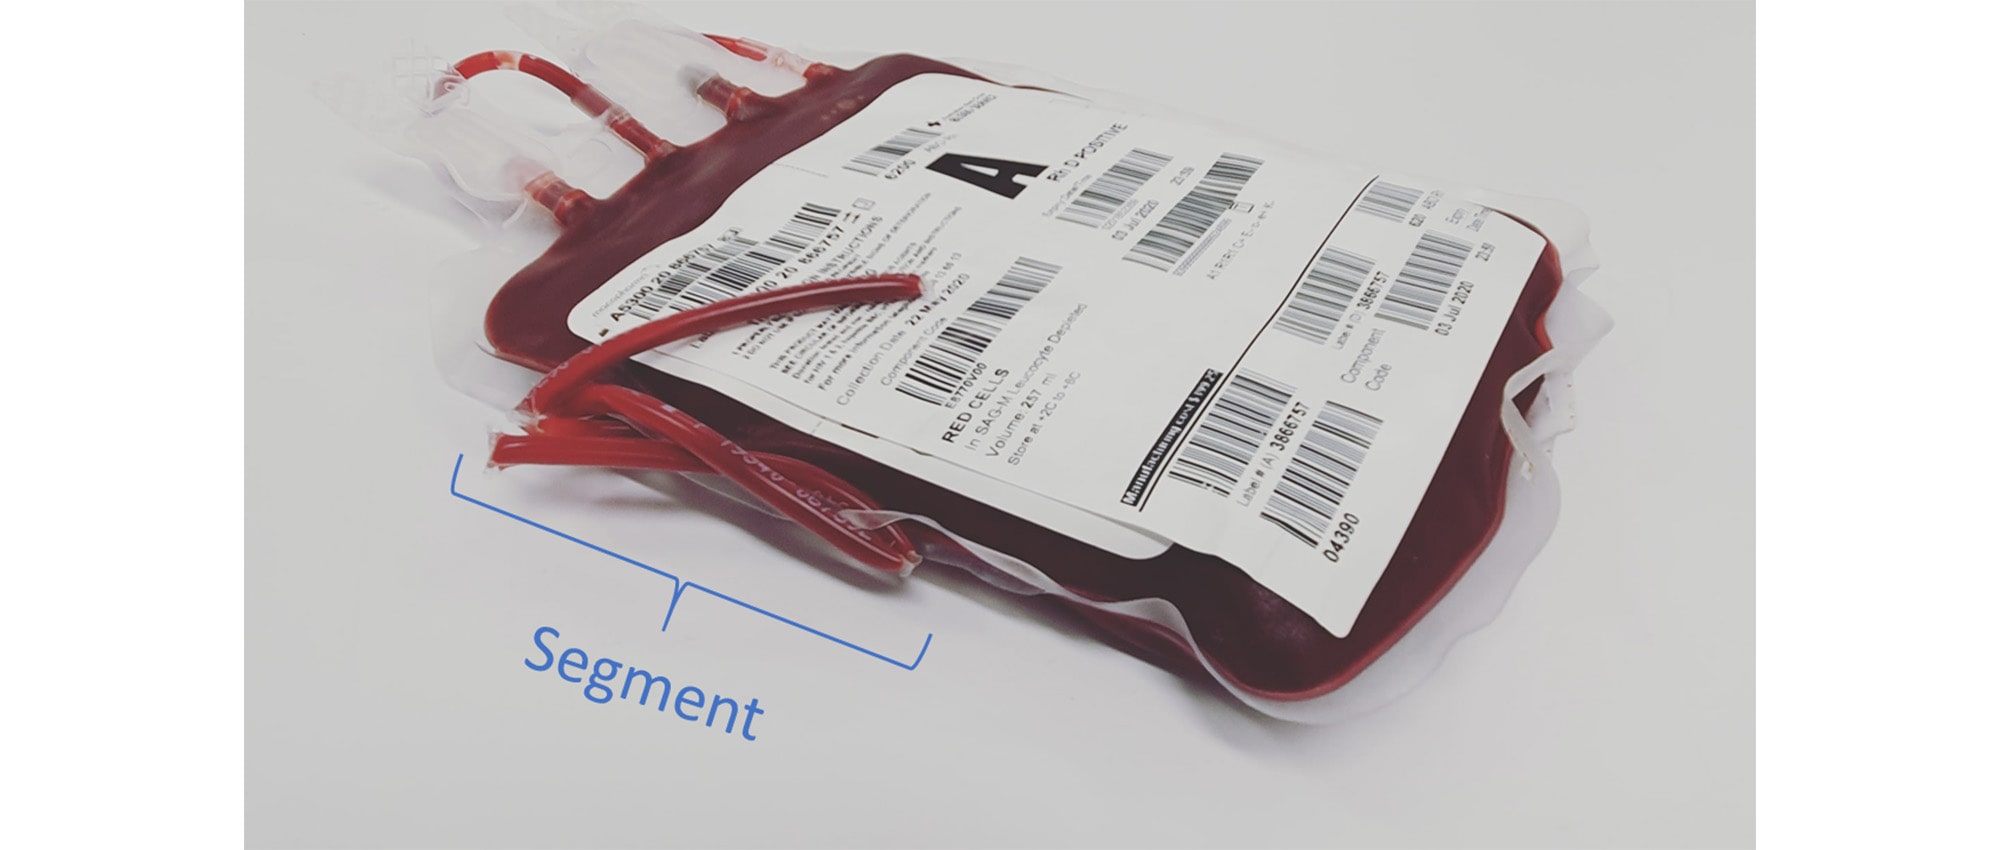 An RBC blood bag, with segment tubing labeled